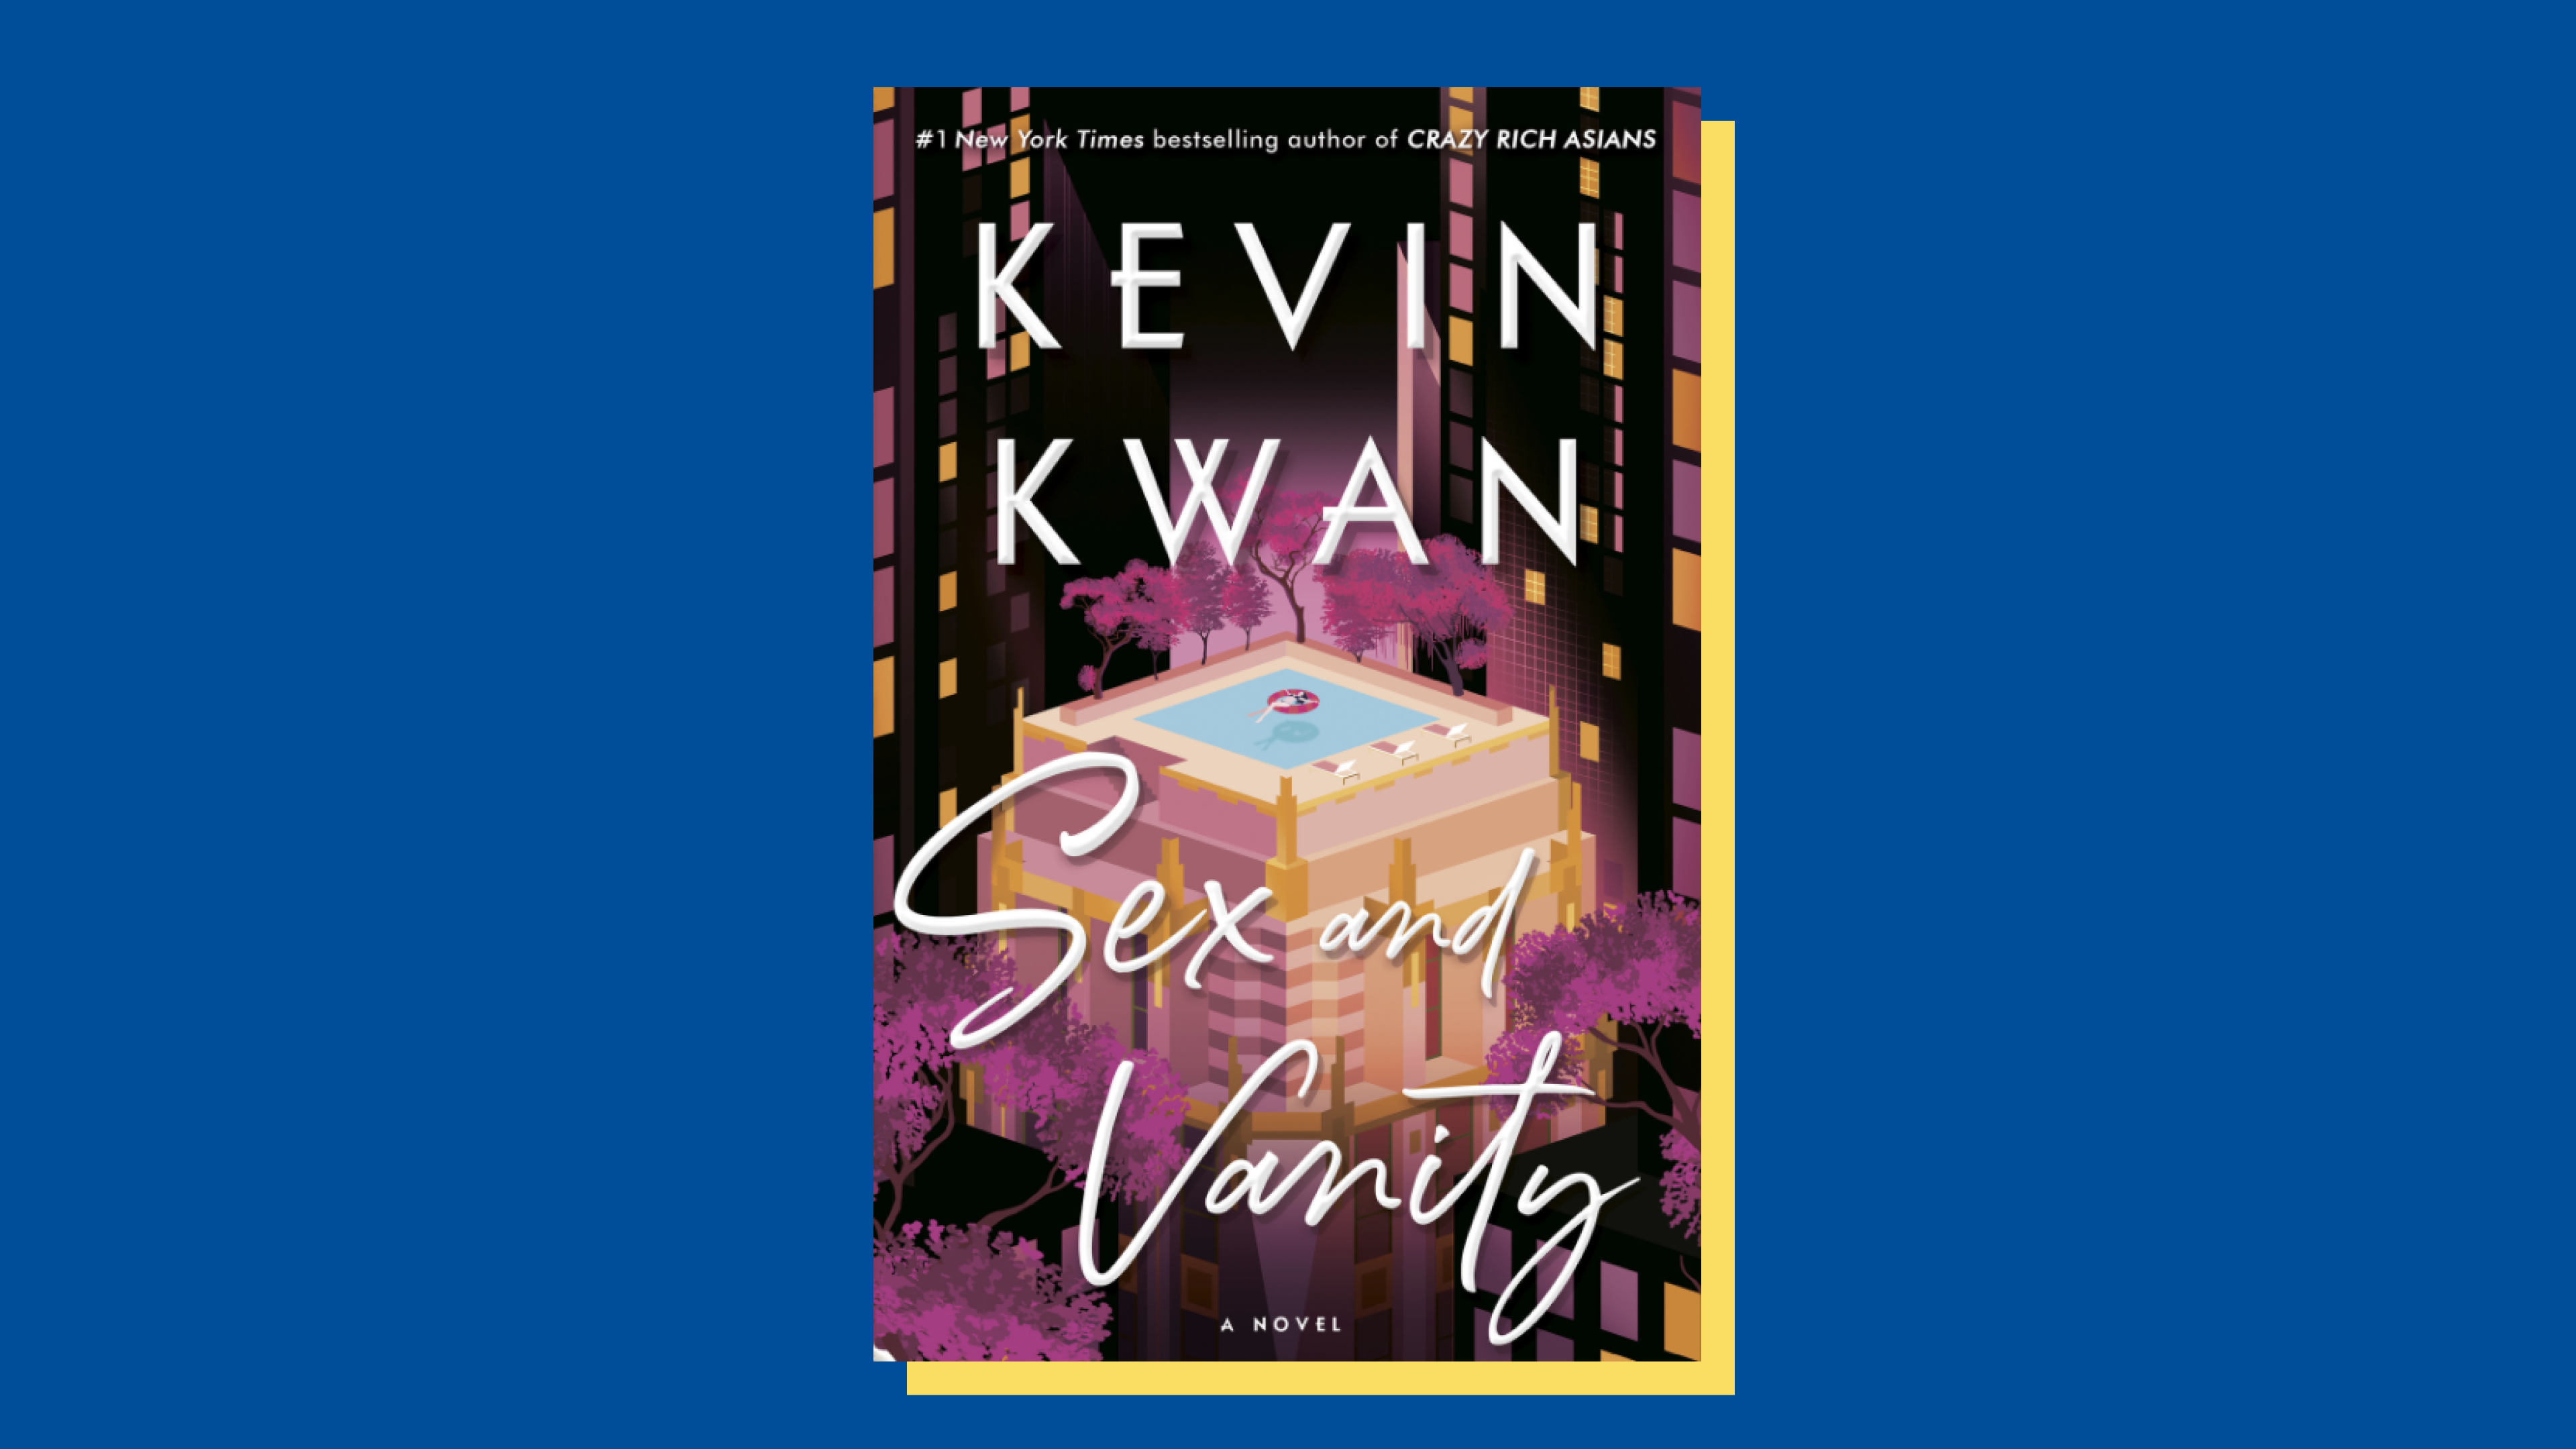 "Sex and Vanity” by Kevin Kwan